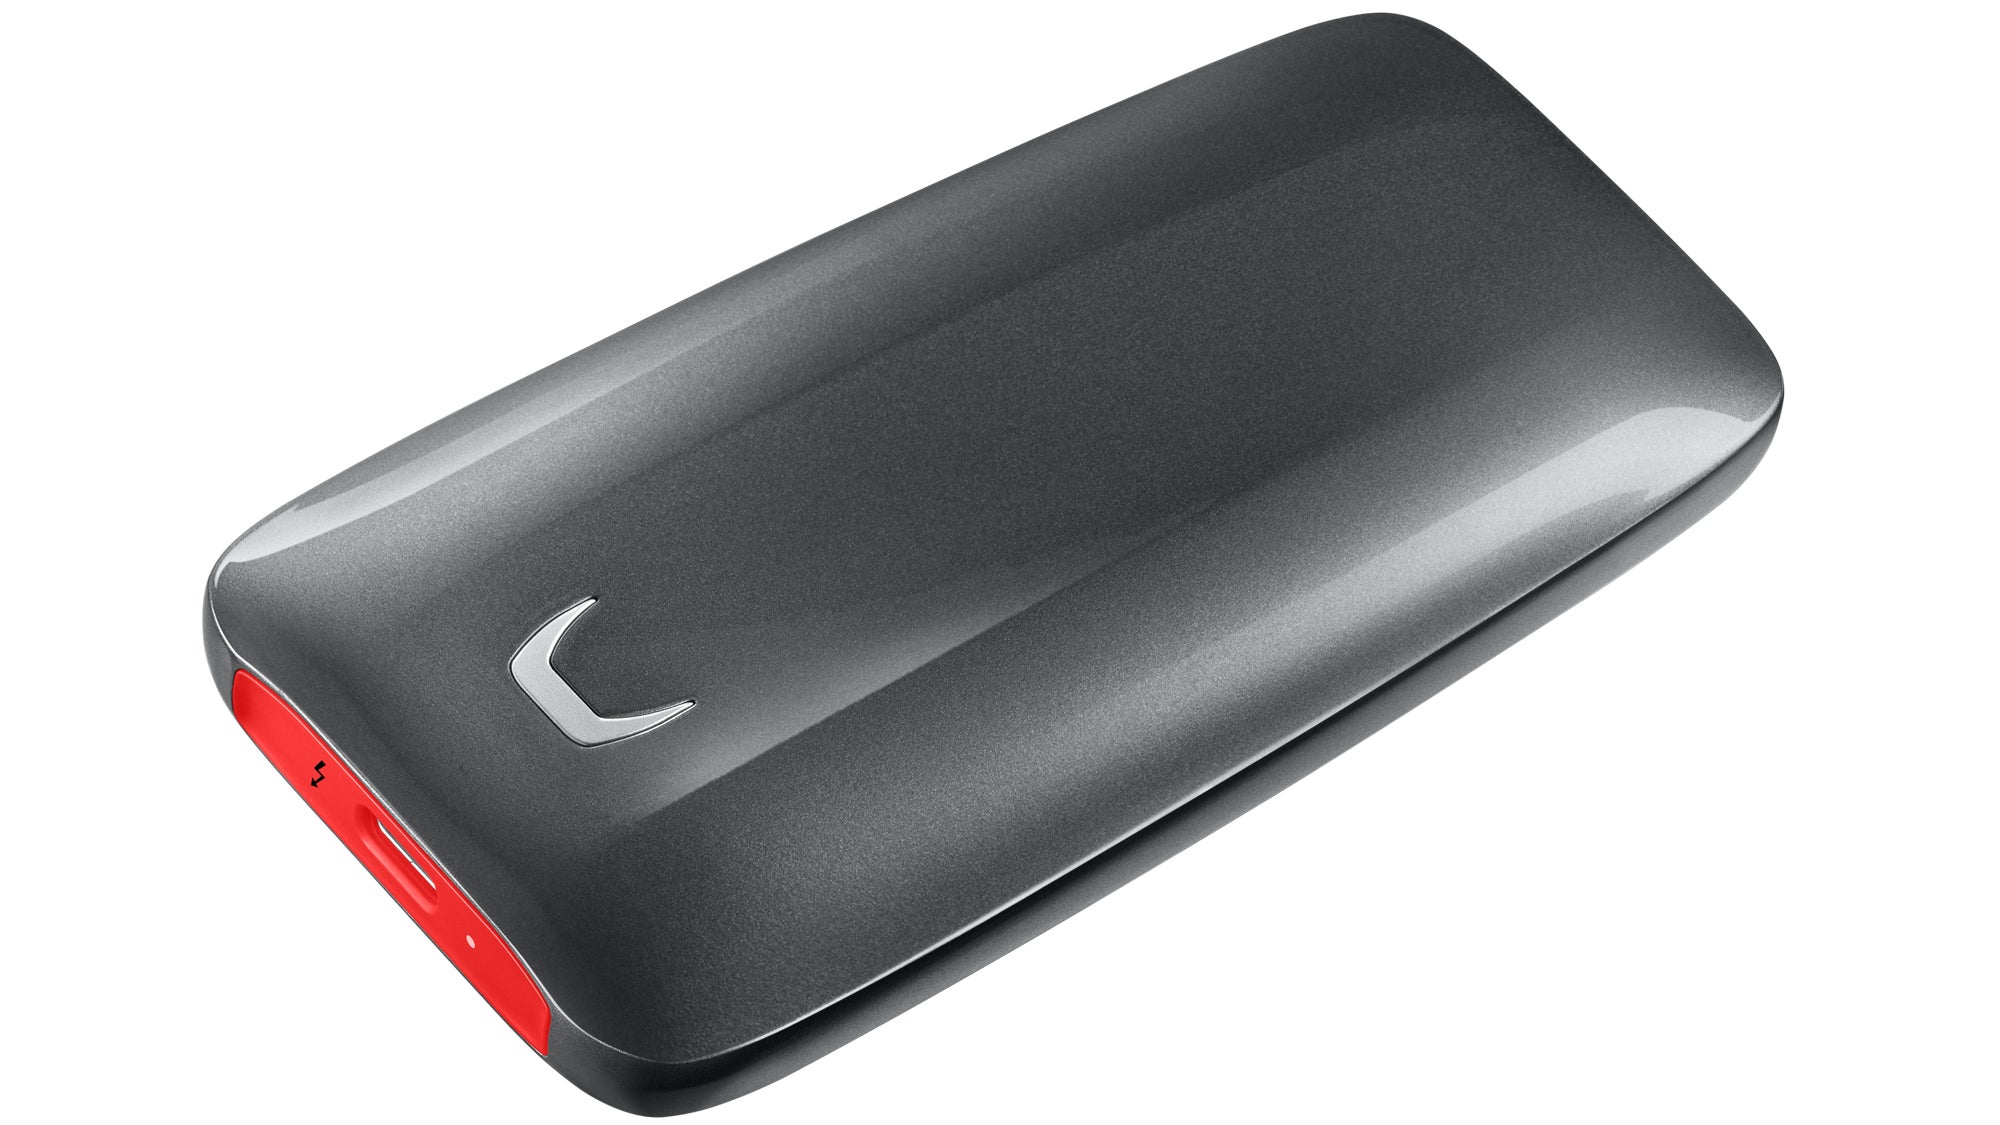 Samsung Portable SSD X5: Australian Price And Release Date